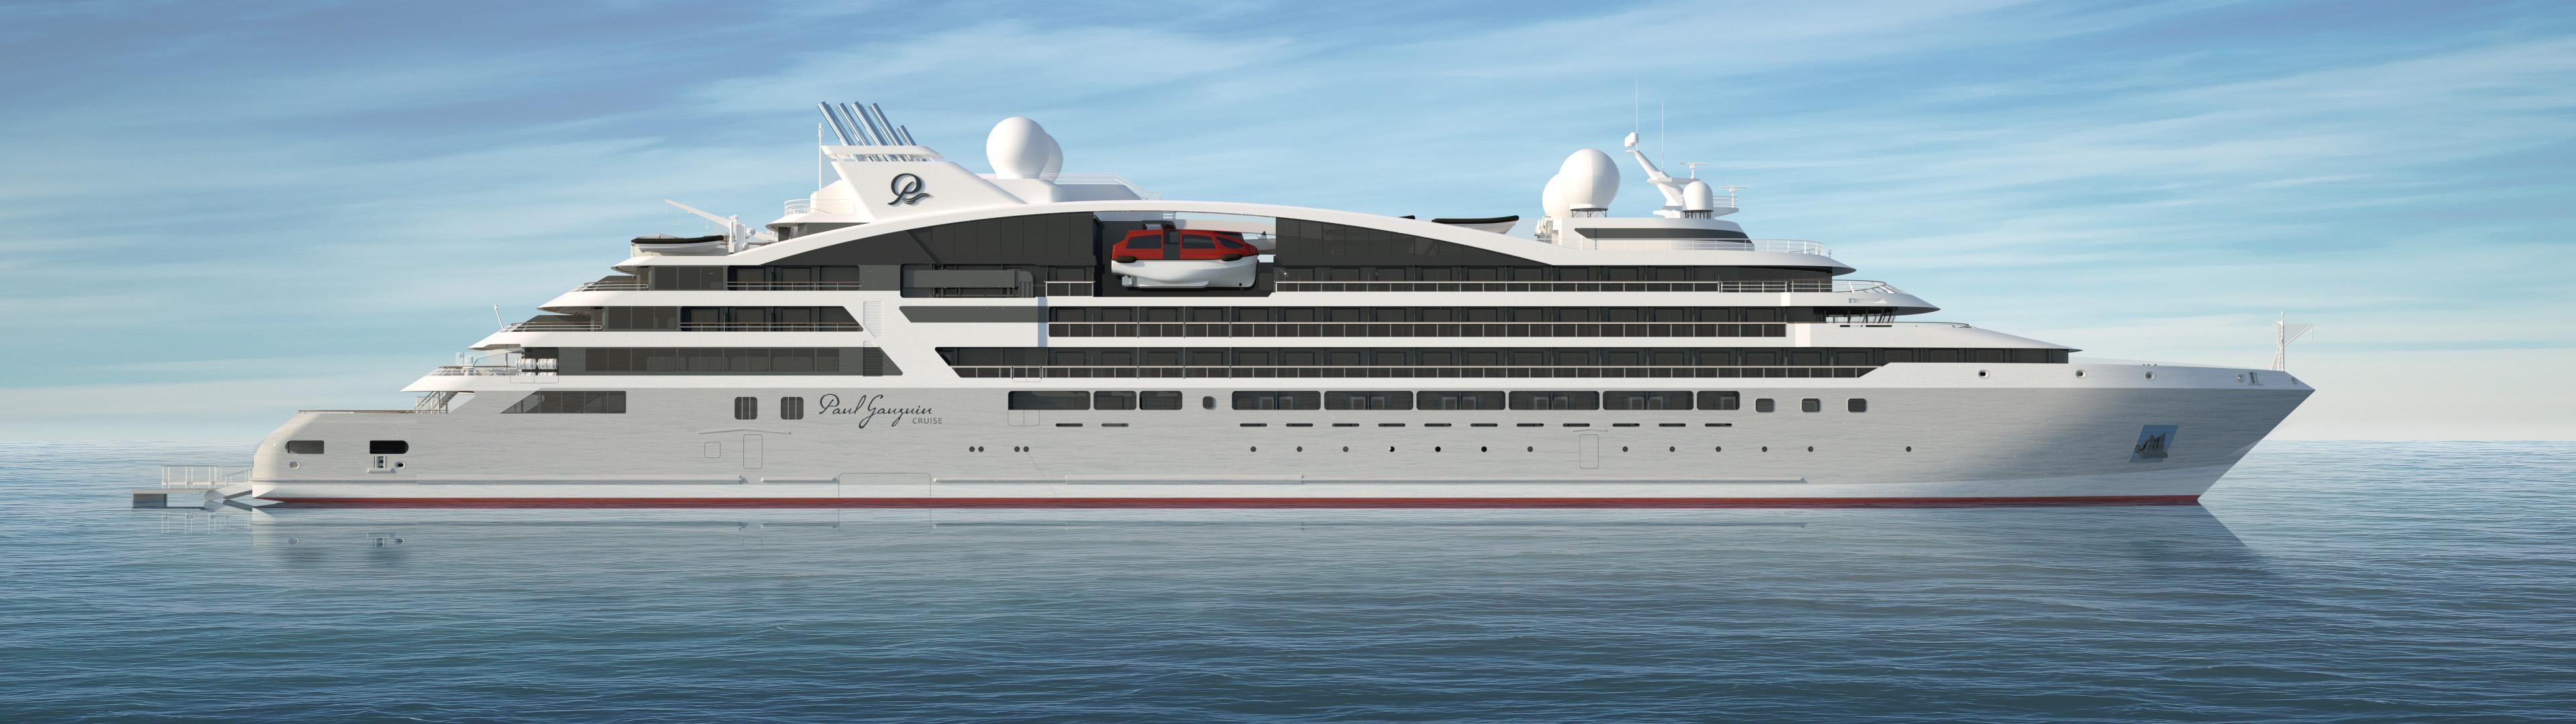 Vard: signed the contract for the 2 new cruise ships for Ponant